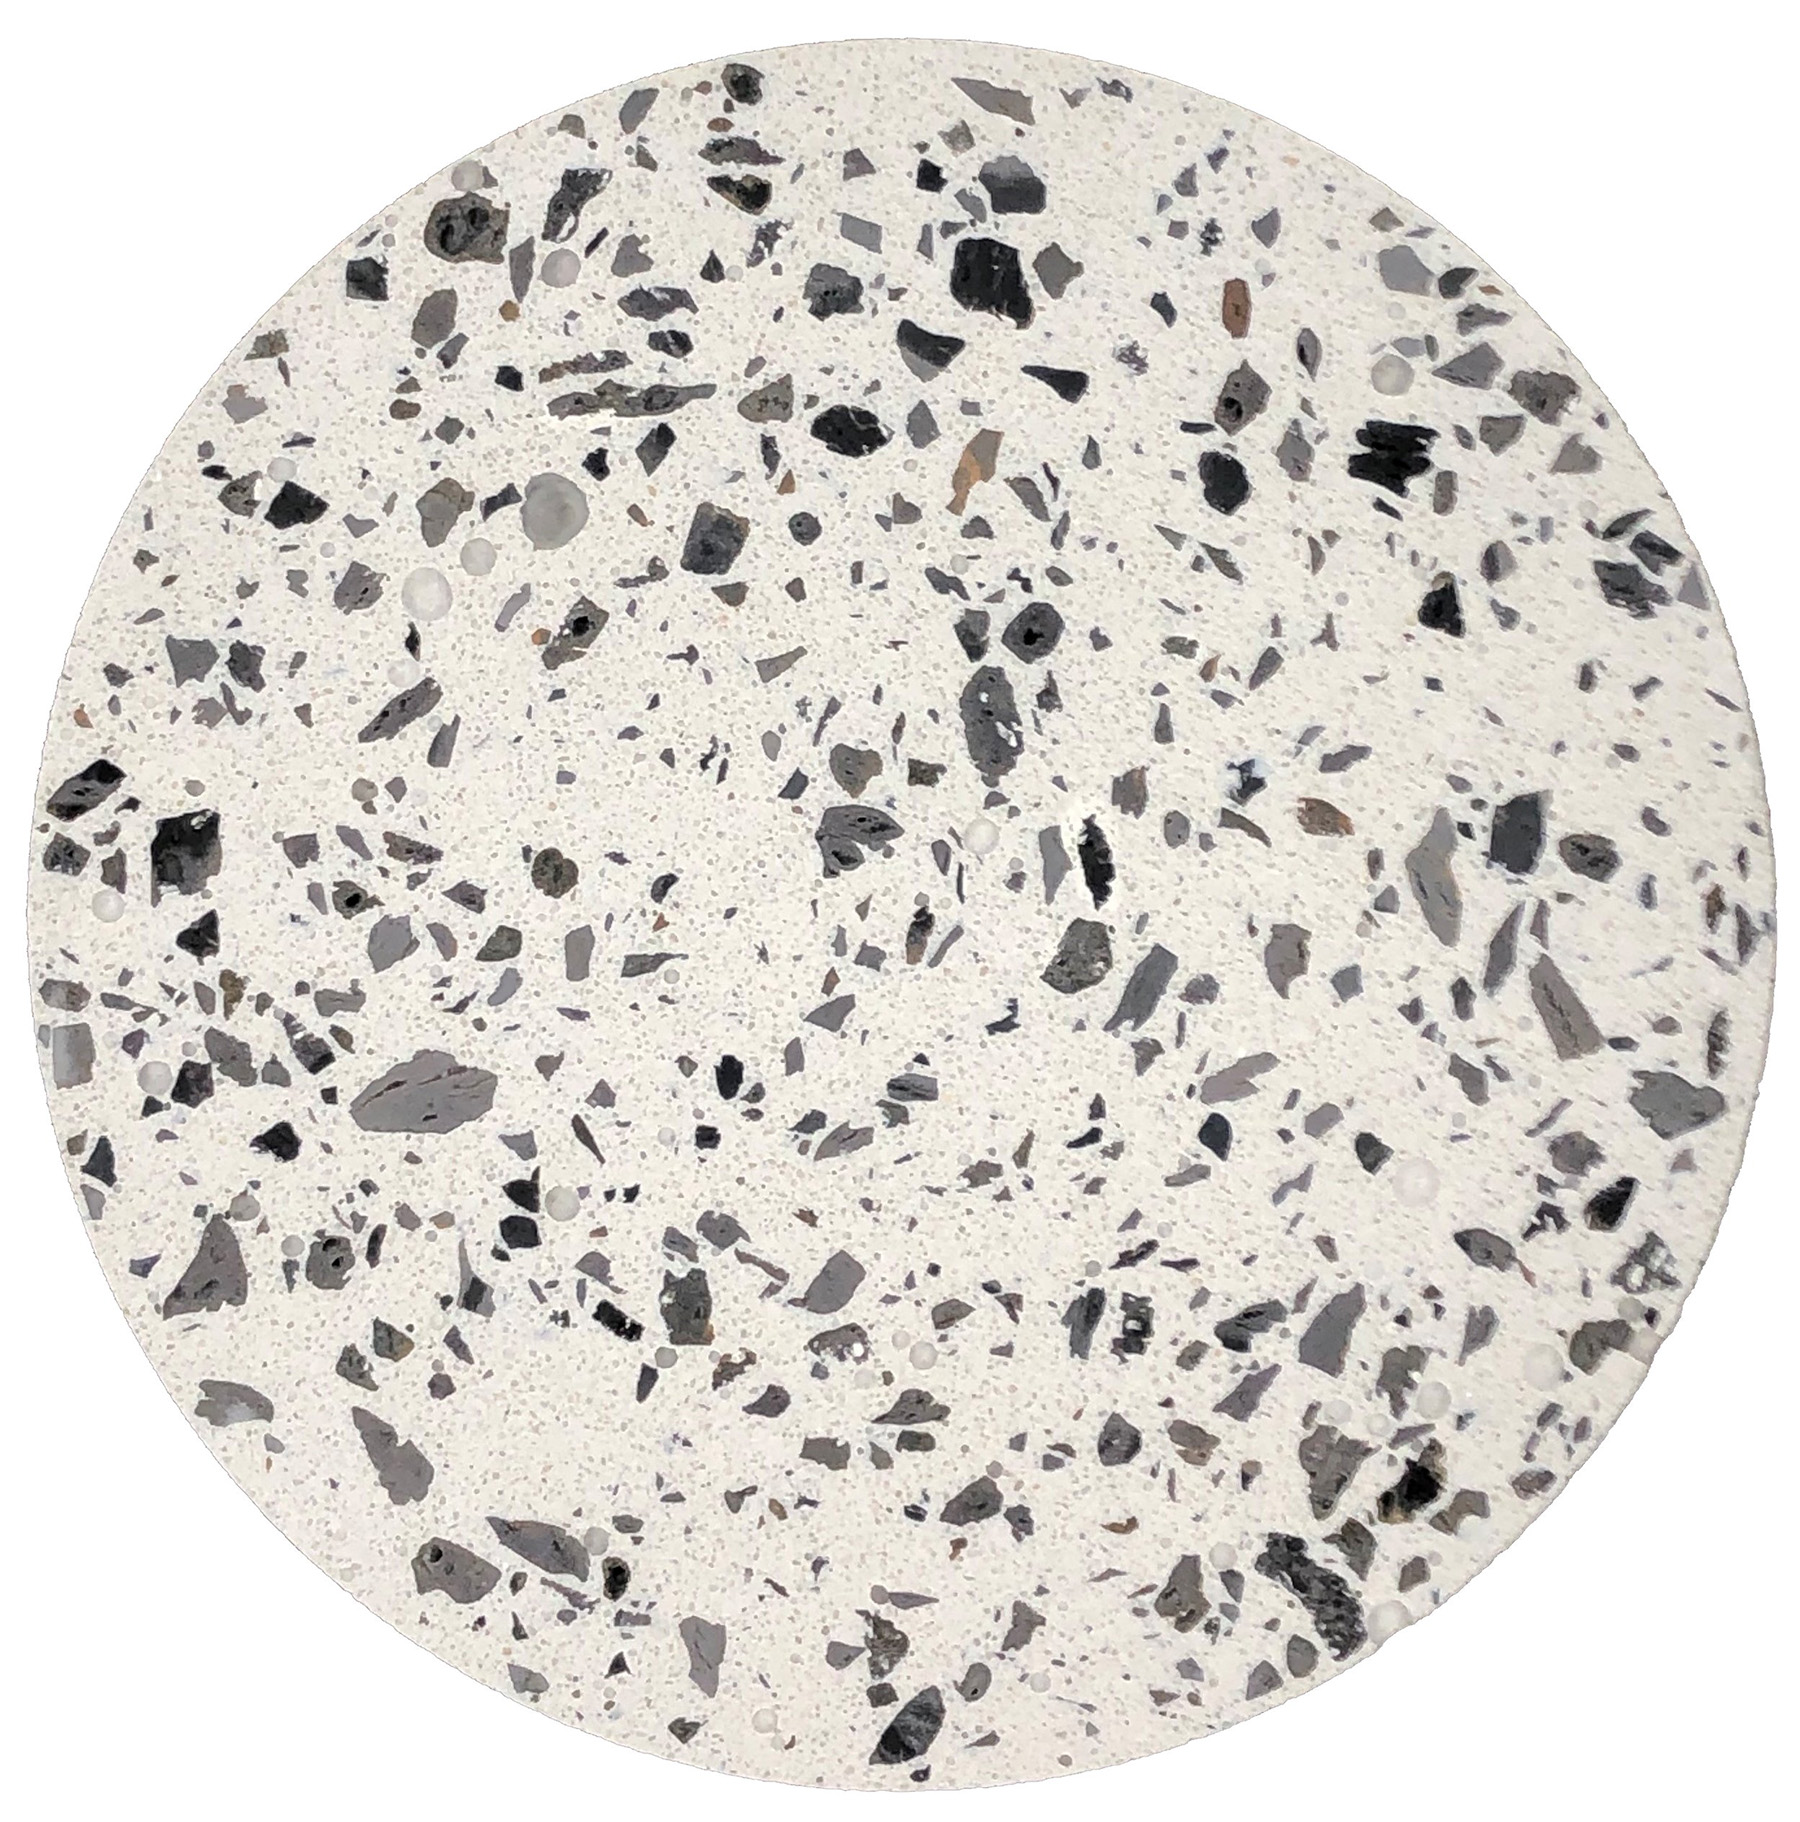 Sample of internally curing concrete. It's a white disc with black spots.